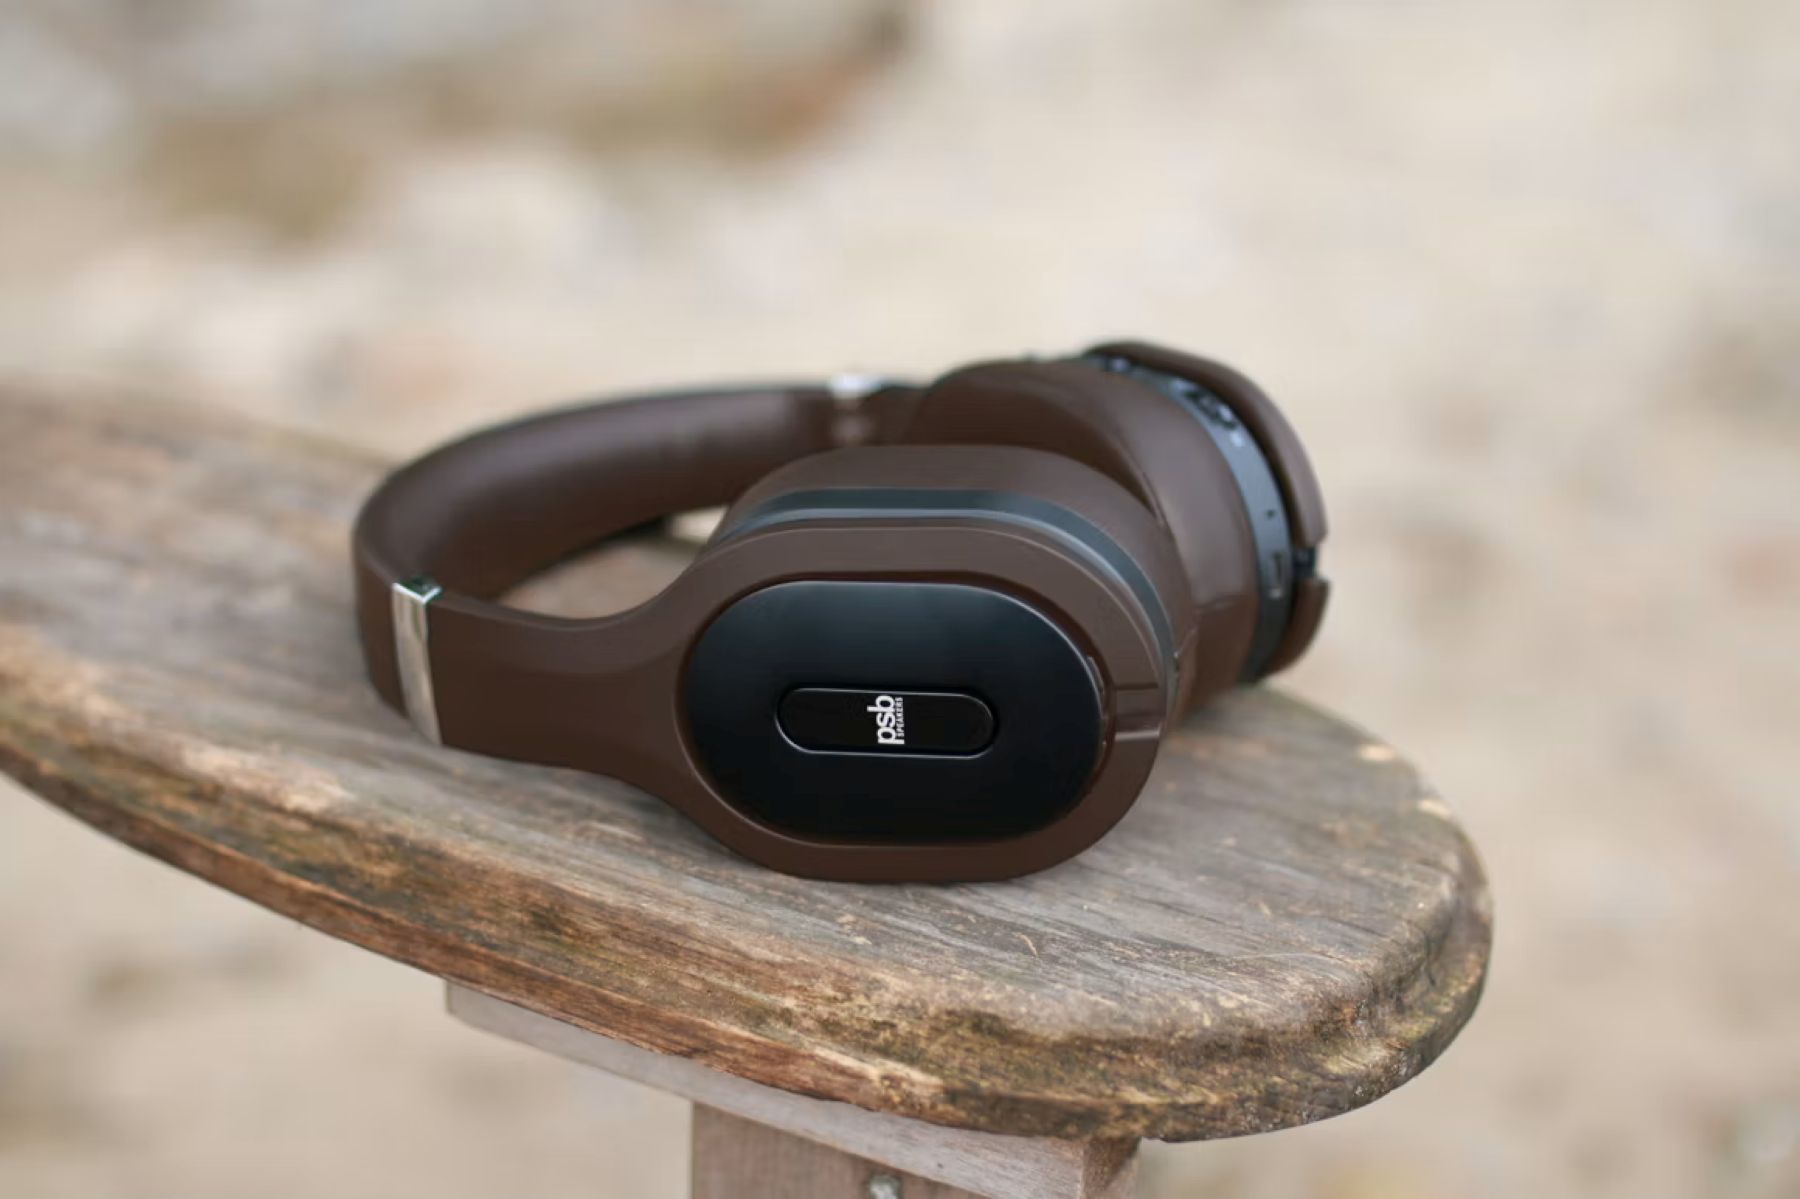 M4U 8 MKII Headphones in Espresso Brown are Now Shipping